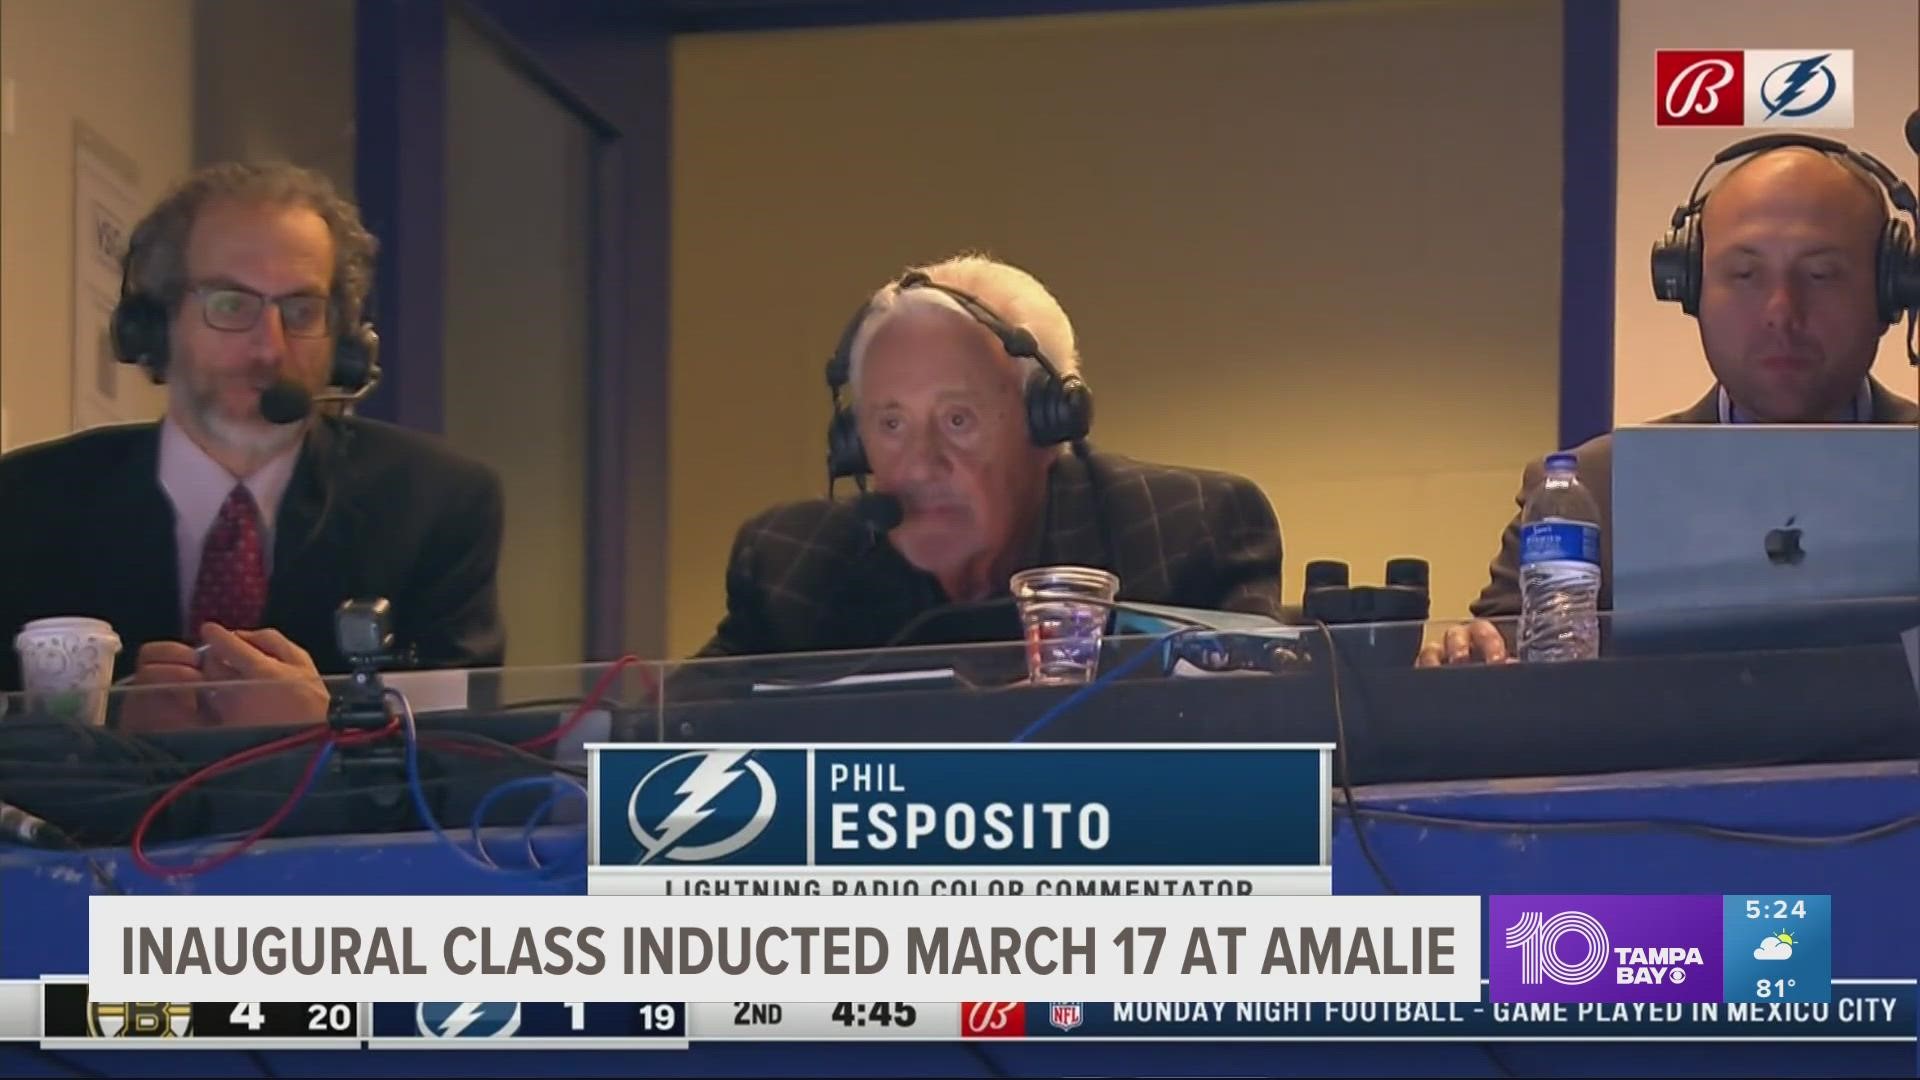 For anyone who has been to Amalie Arena – you've most likely passed Phil Esposito in front of the building.